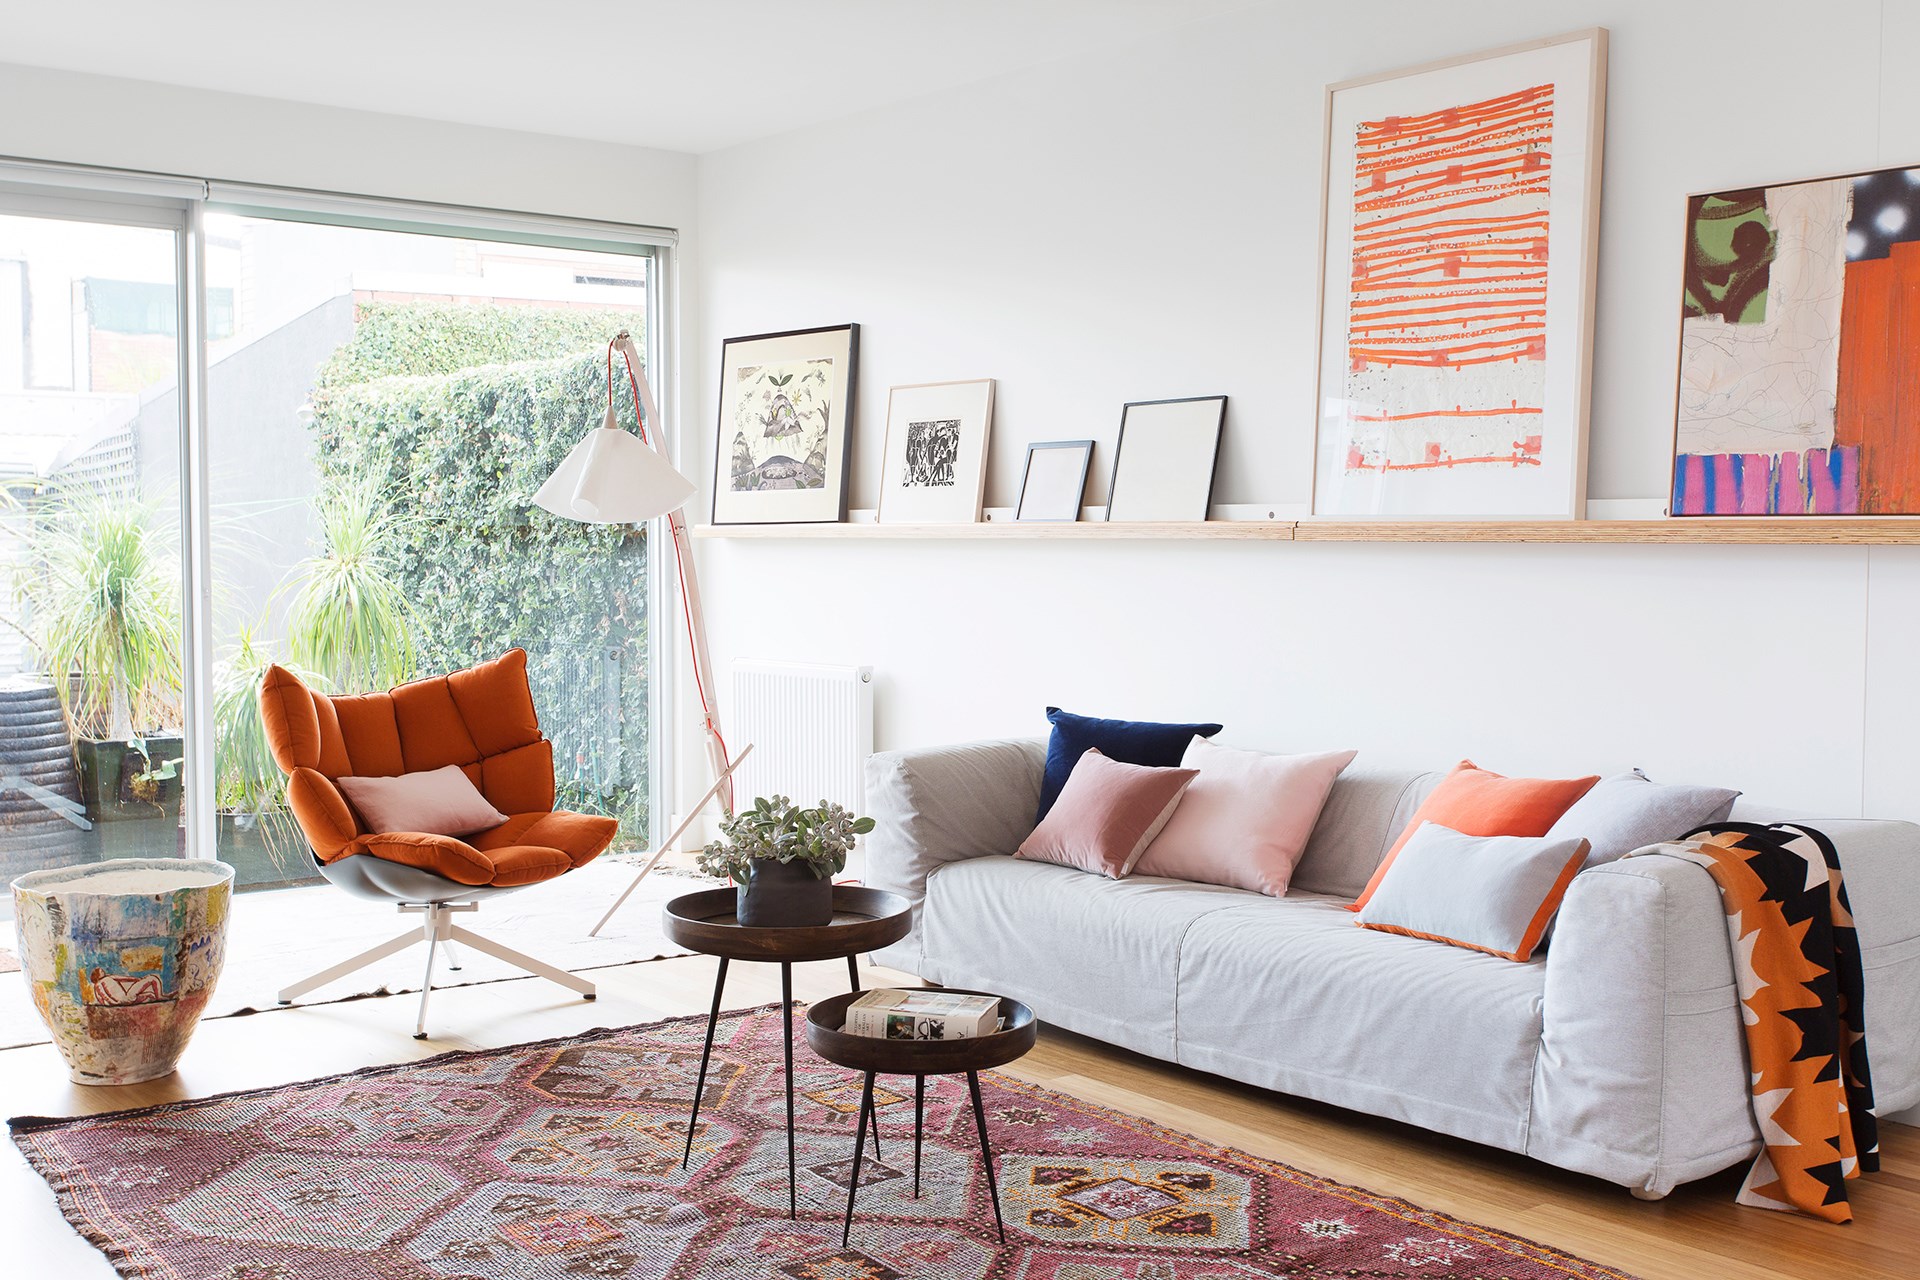 This light-filled living room is brought to life with bursts of burnt orange and terracotta, contrasted perfectly with soft pink and grey for a vibrant yet sophisticated style. [> See the rest of this bespoke Melbourne terrace here.](http://www.homestolove.com.au/bespoke-renovation-of-an-old-victorian-terrace-4456) Photo: Martina Gemmola / Australian House & Garden